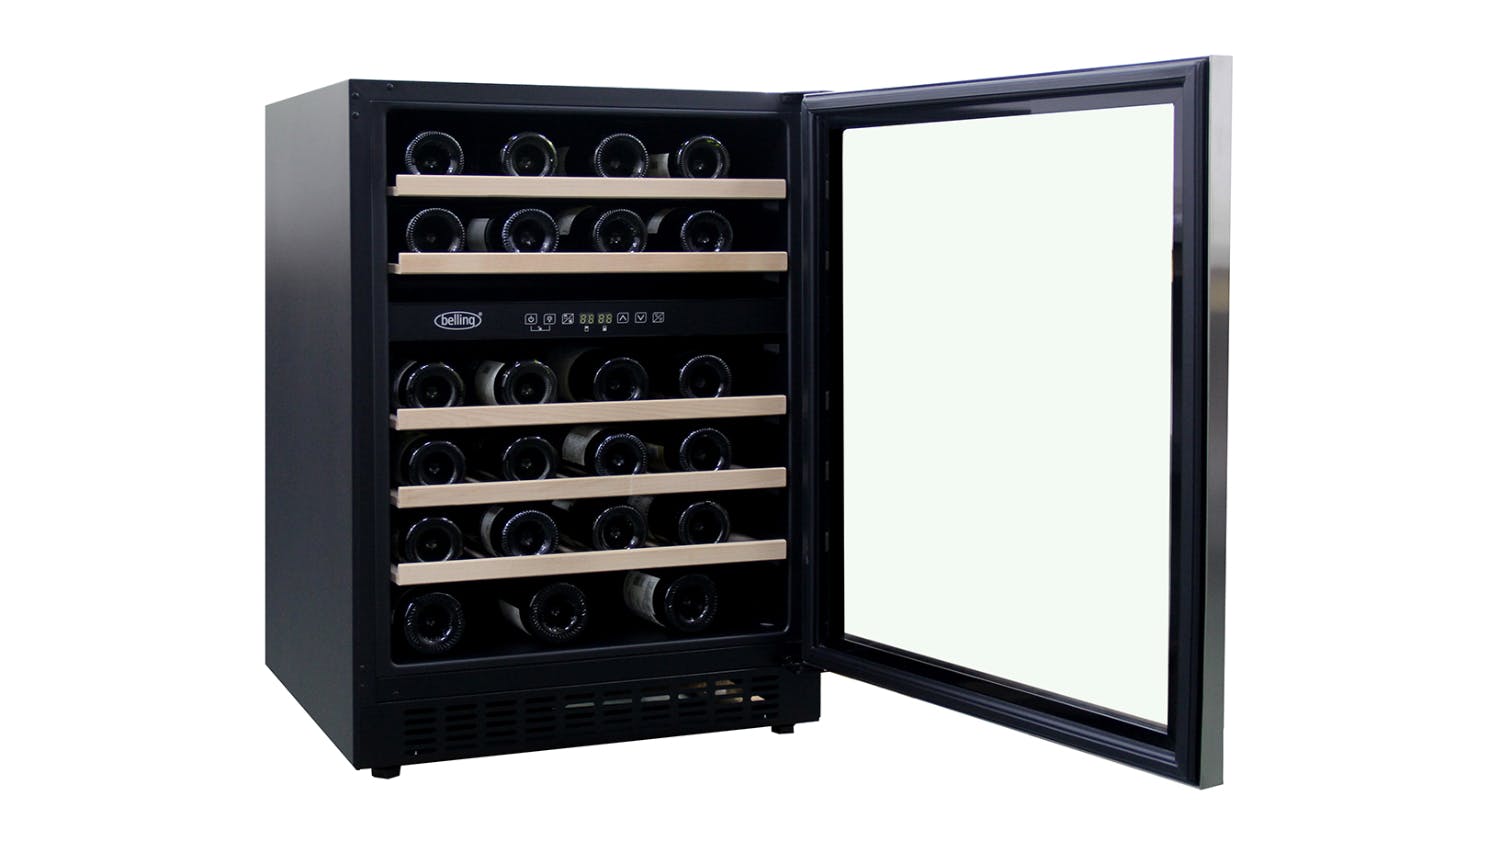 Belling 46 Bottle Dual Zone Right Hand Wine Cooler - Stainless Steel